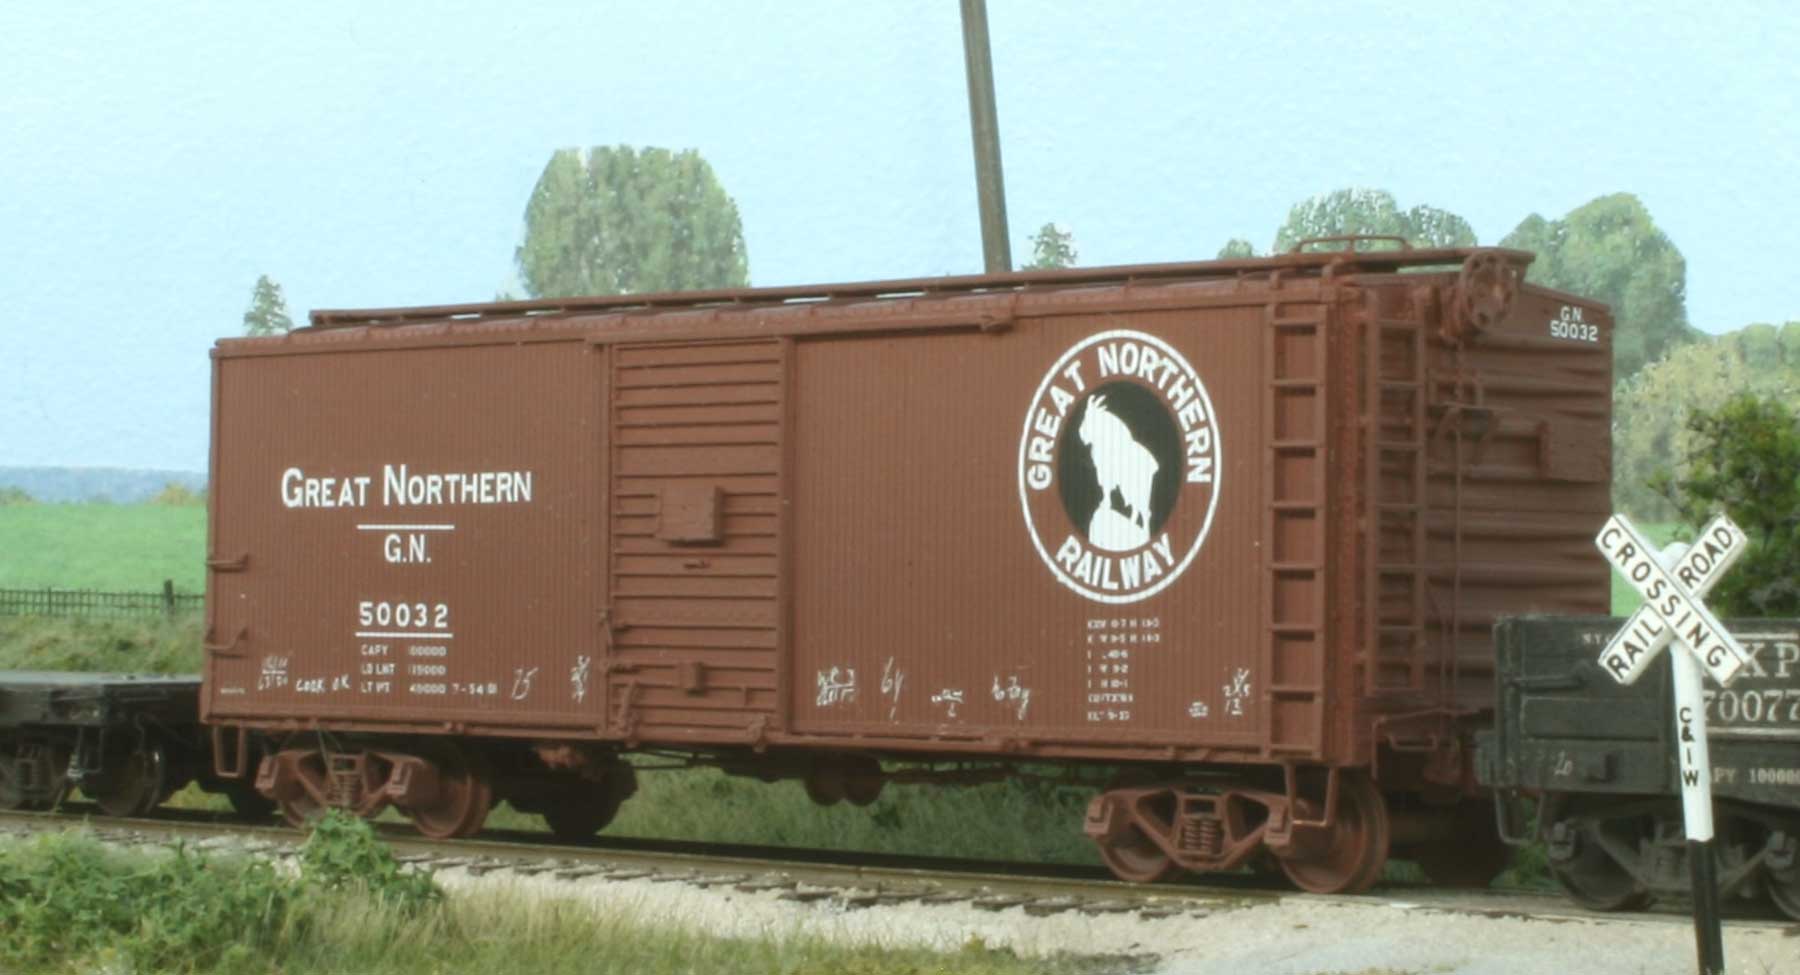 The GN composite wood-sheathed boxcar in service.